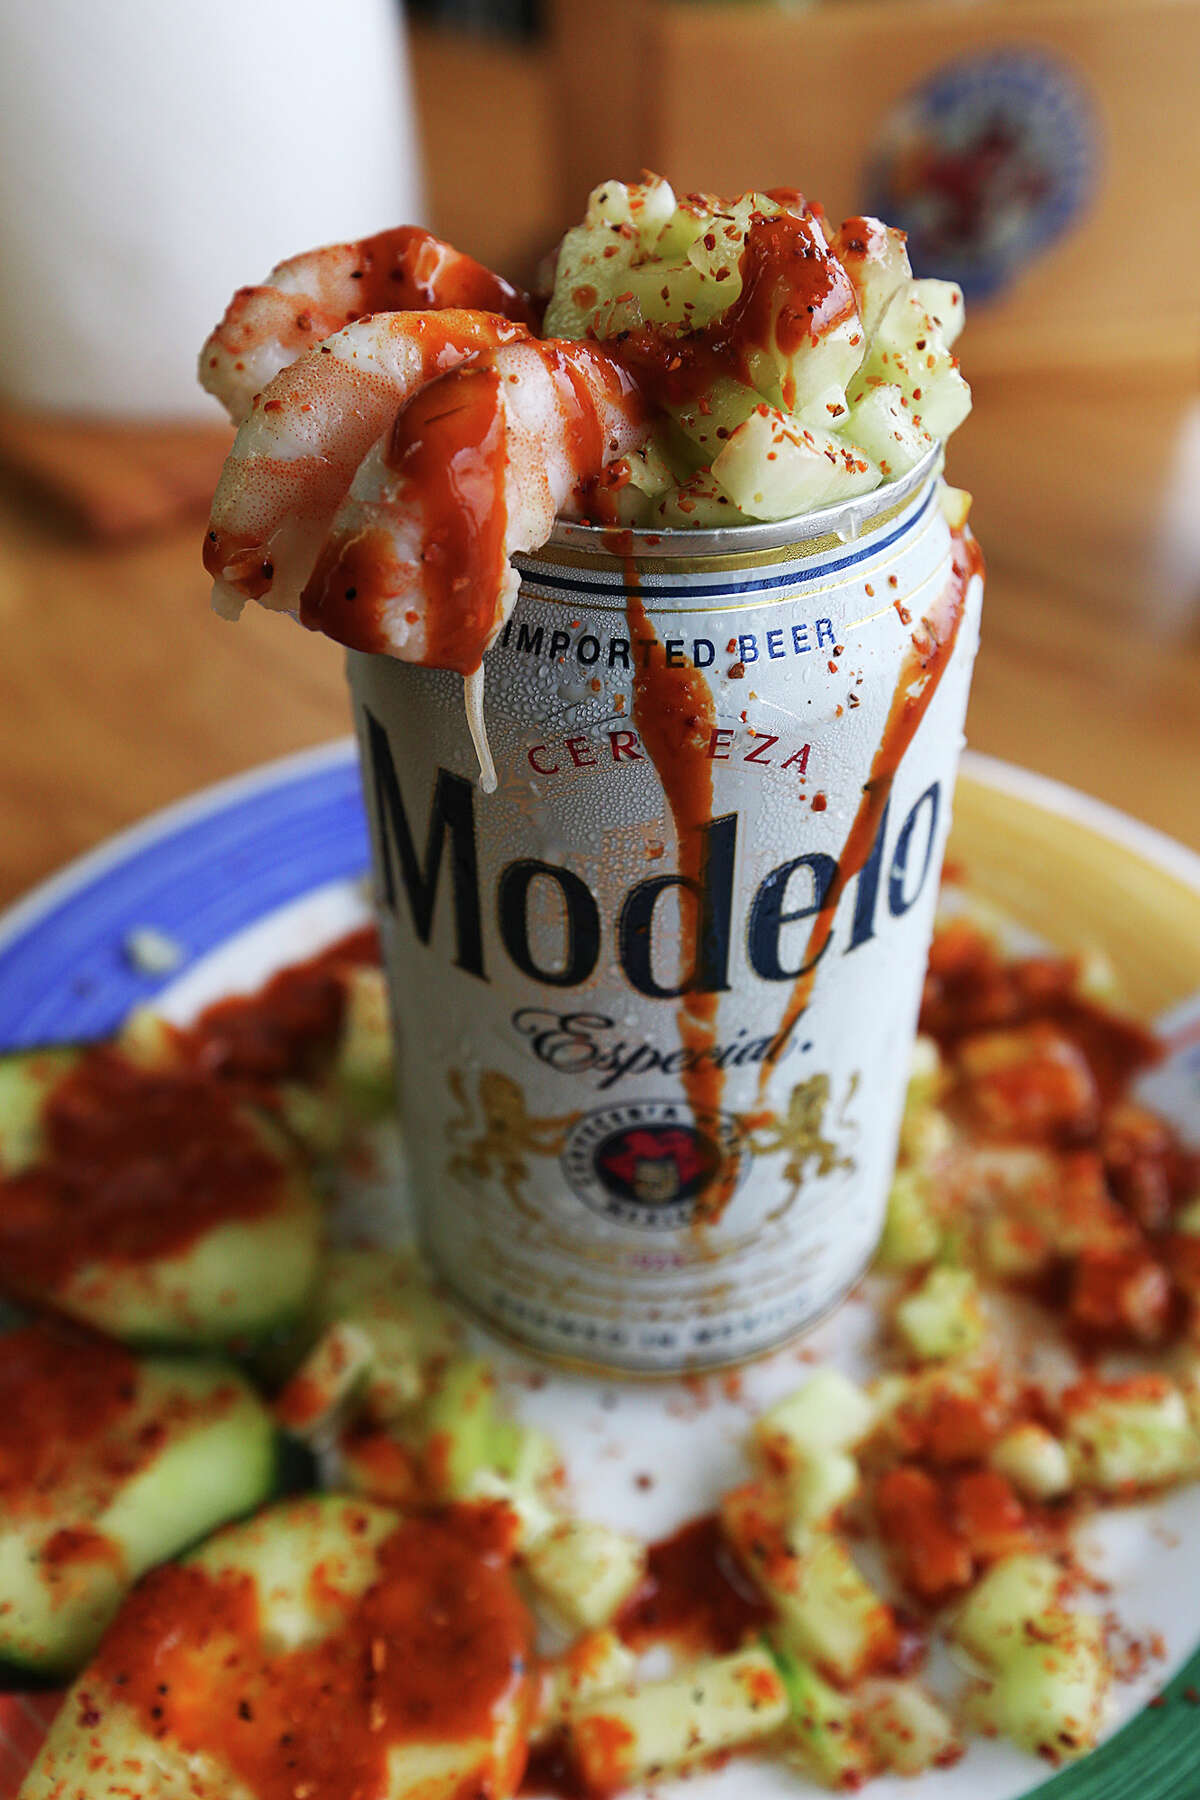 The cerveza preparada comes with shrimp, cucumbers and a hot sauce at Las Islas Marias Mexican seafood restaurant.